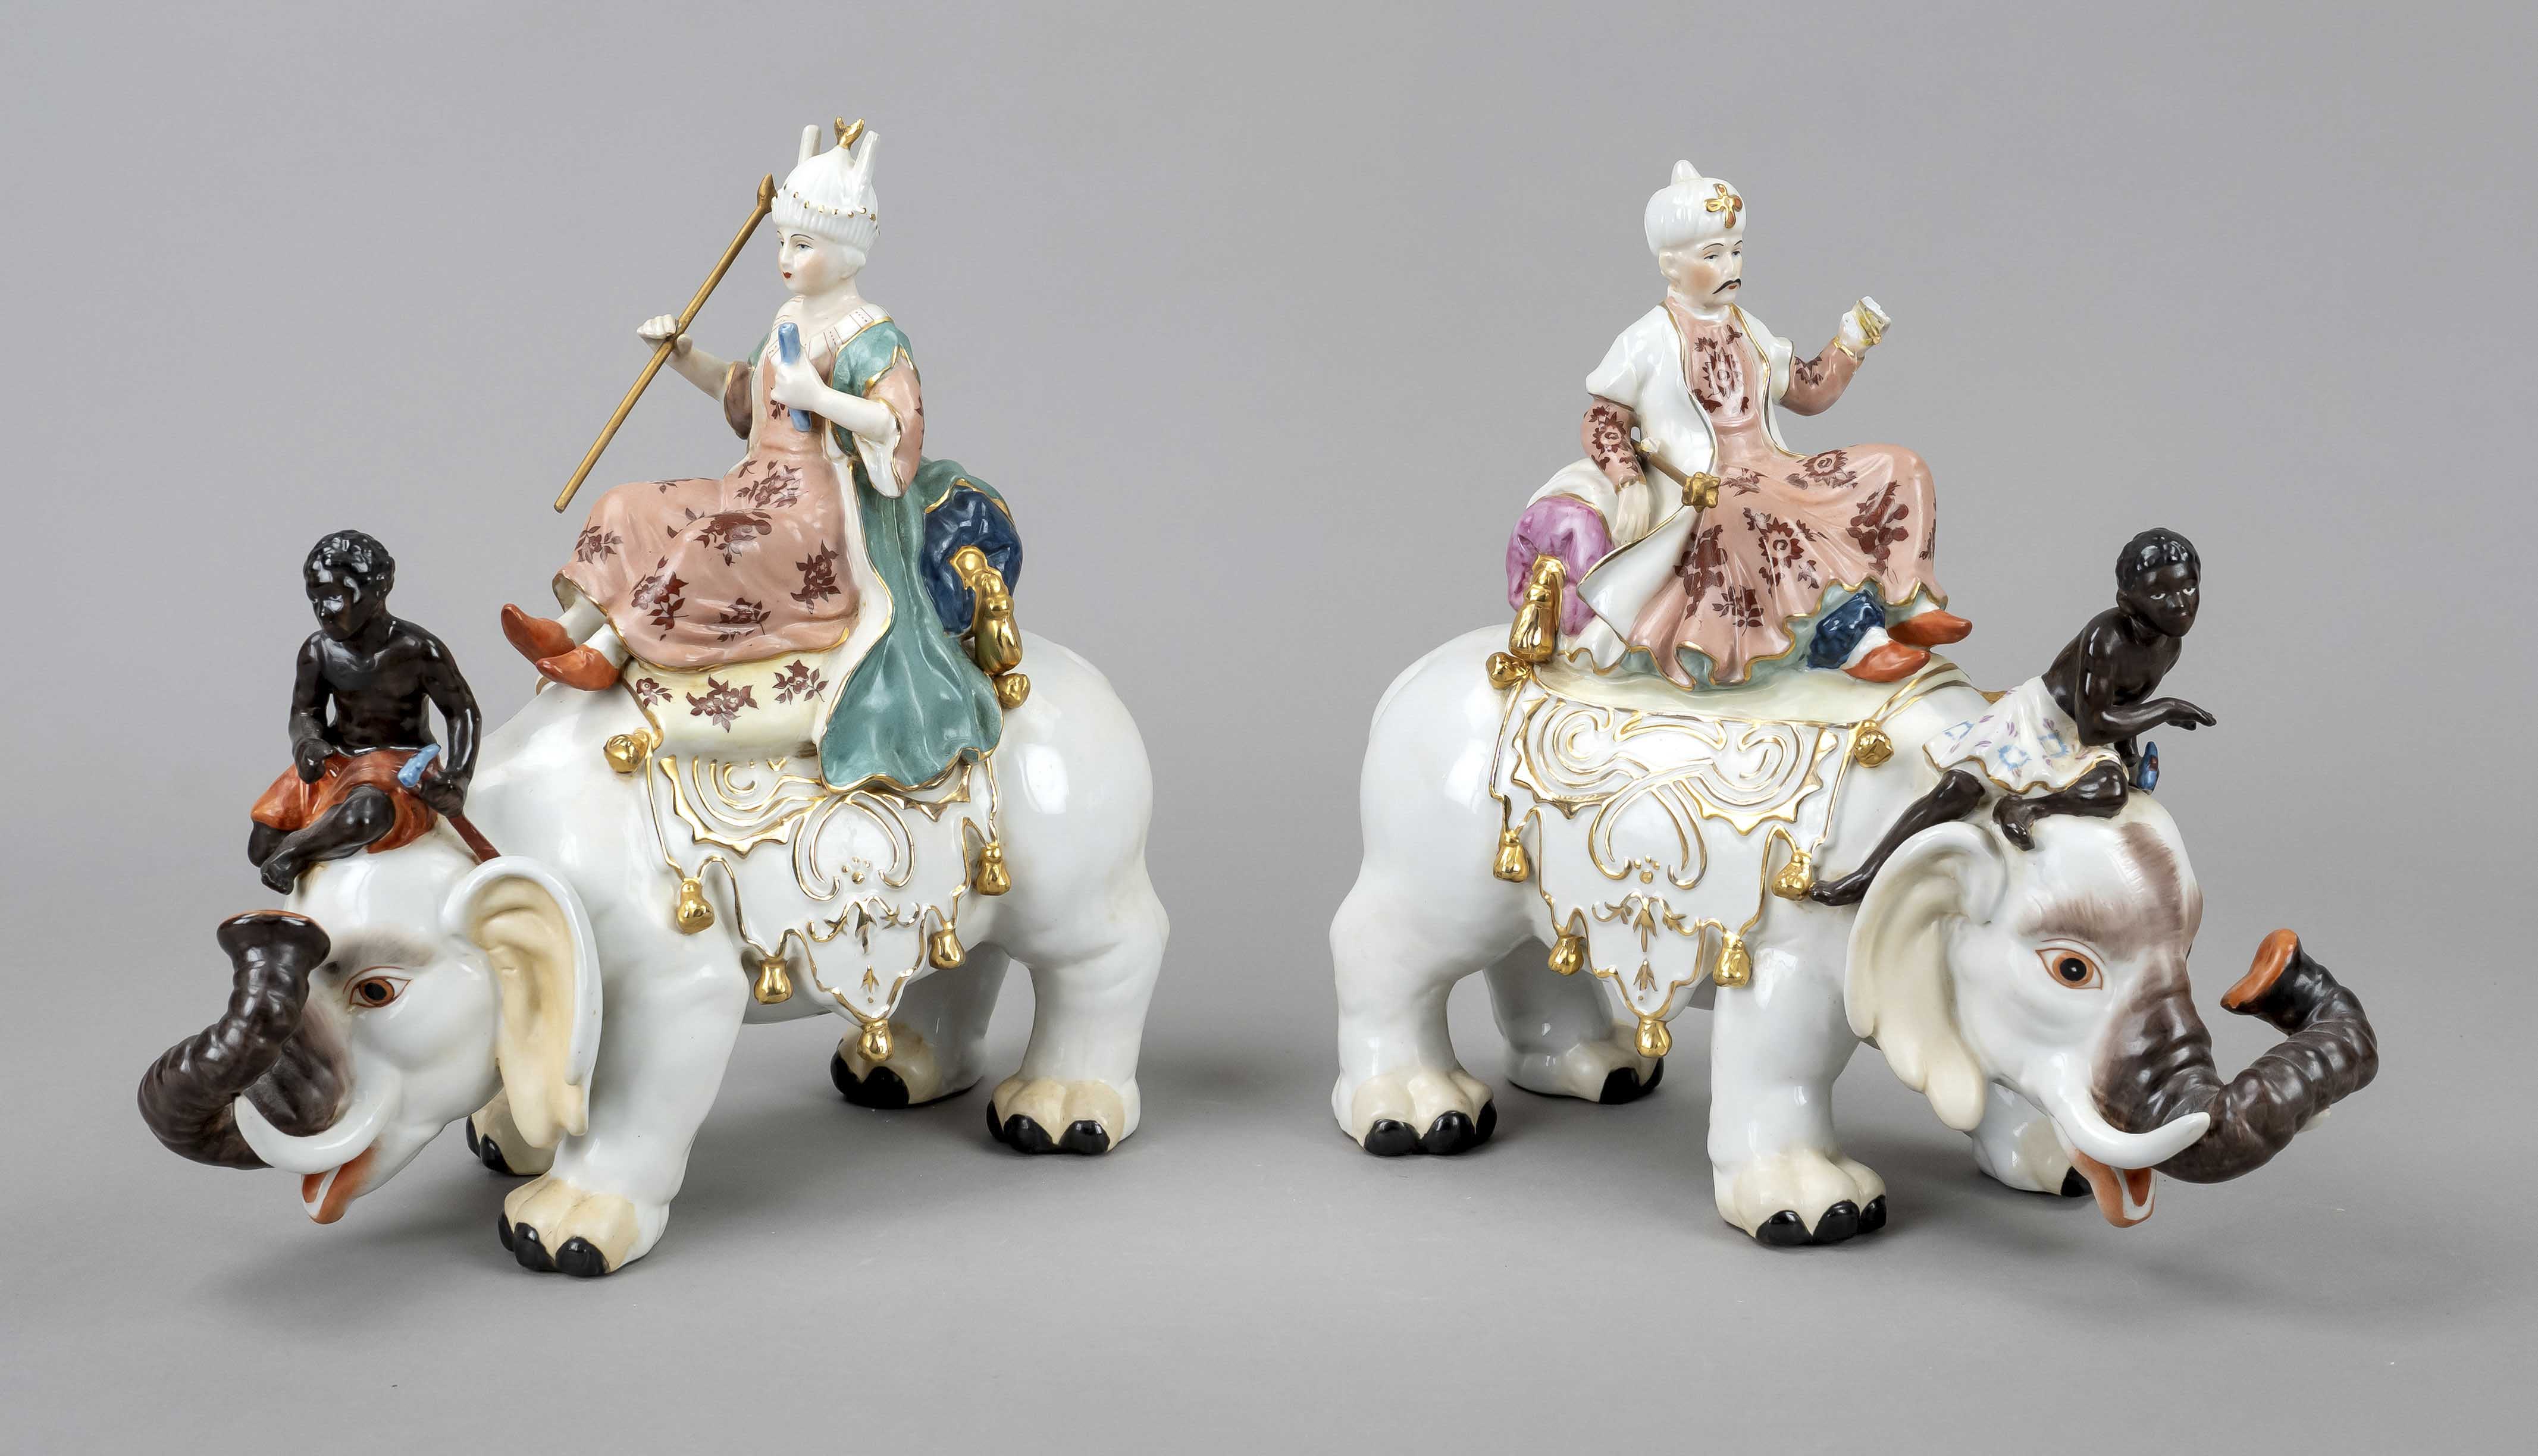 Pair of figures 'Sultan and sultana on elephants' after the Meissen model, 20th/21st century, marked - Image 2 of 2